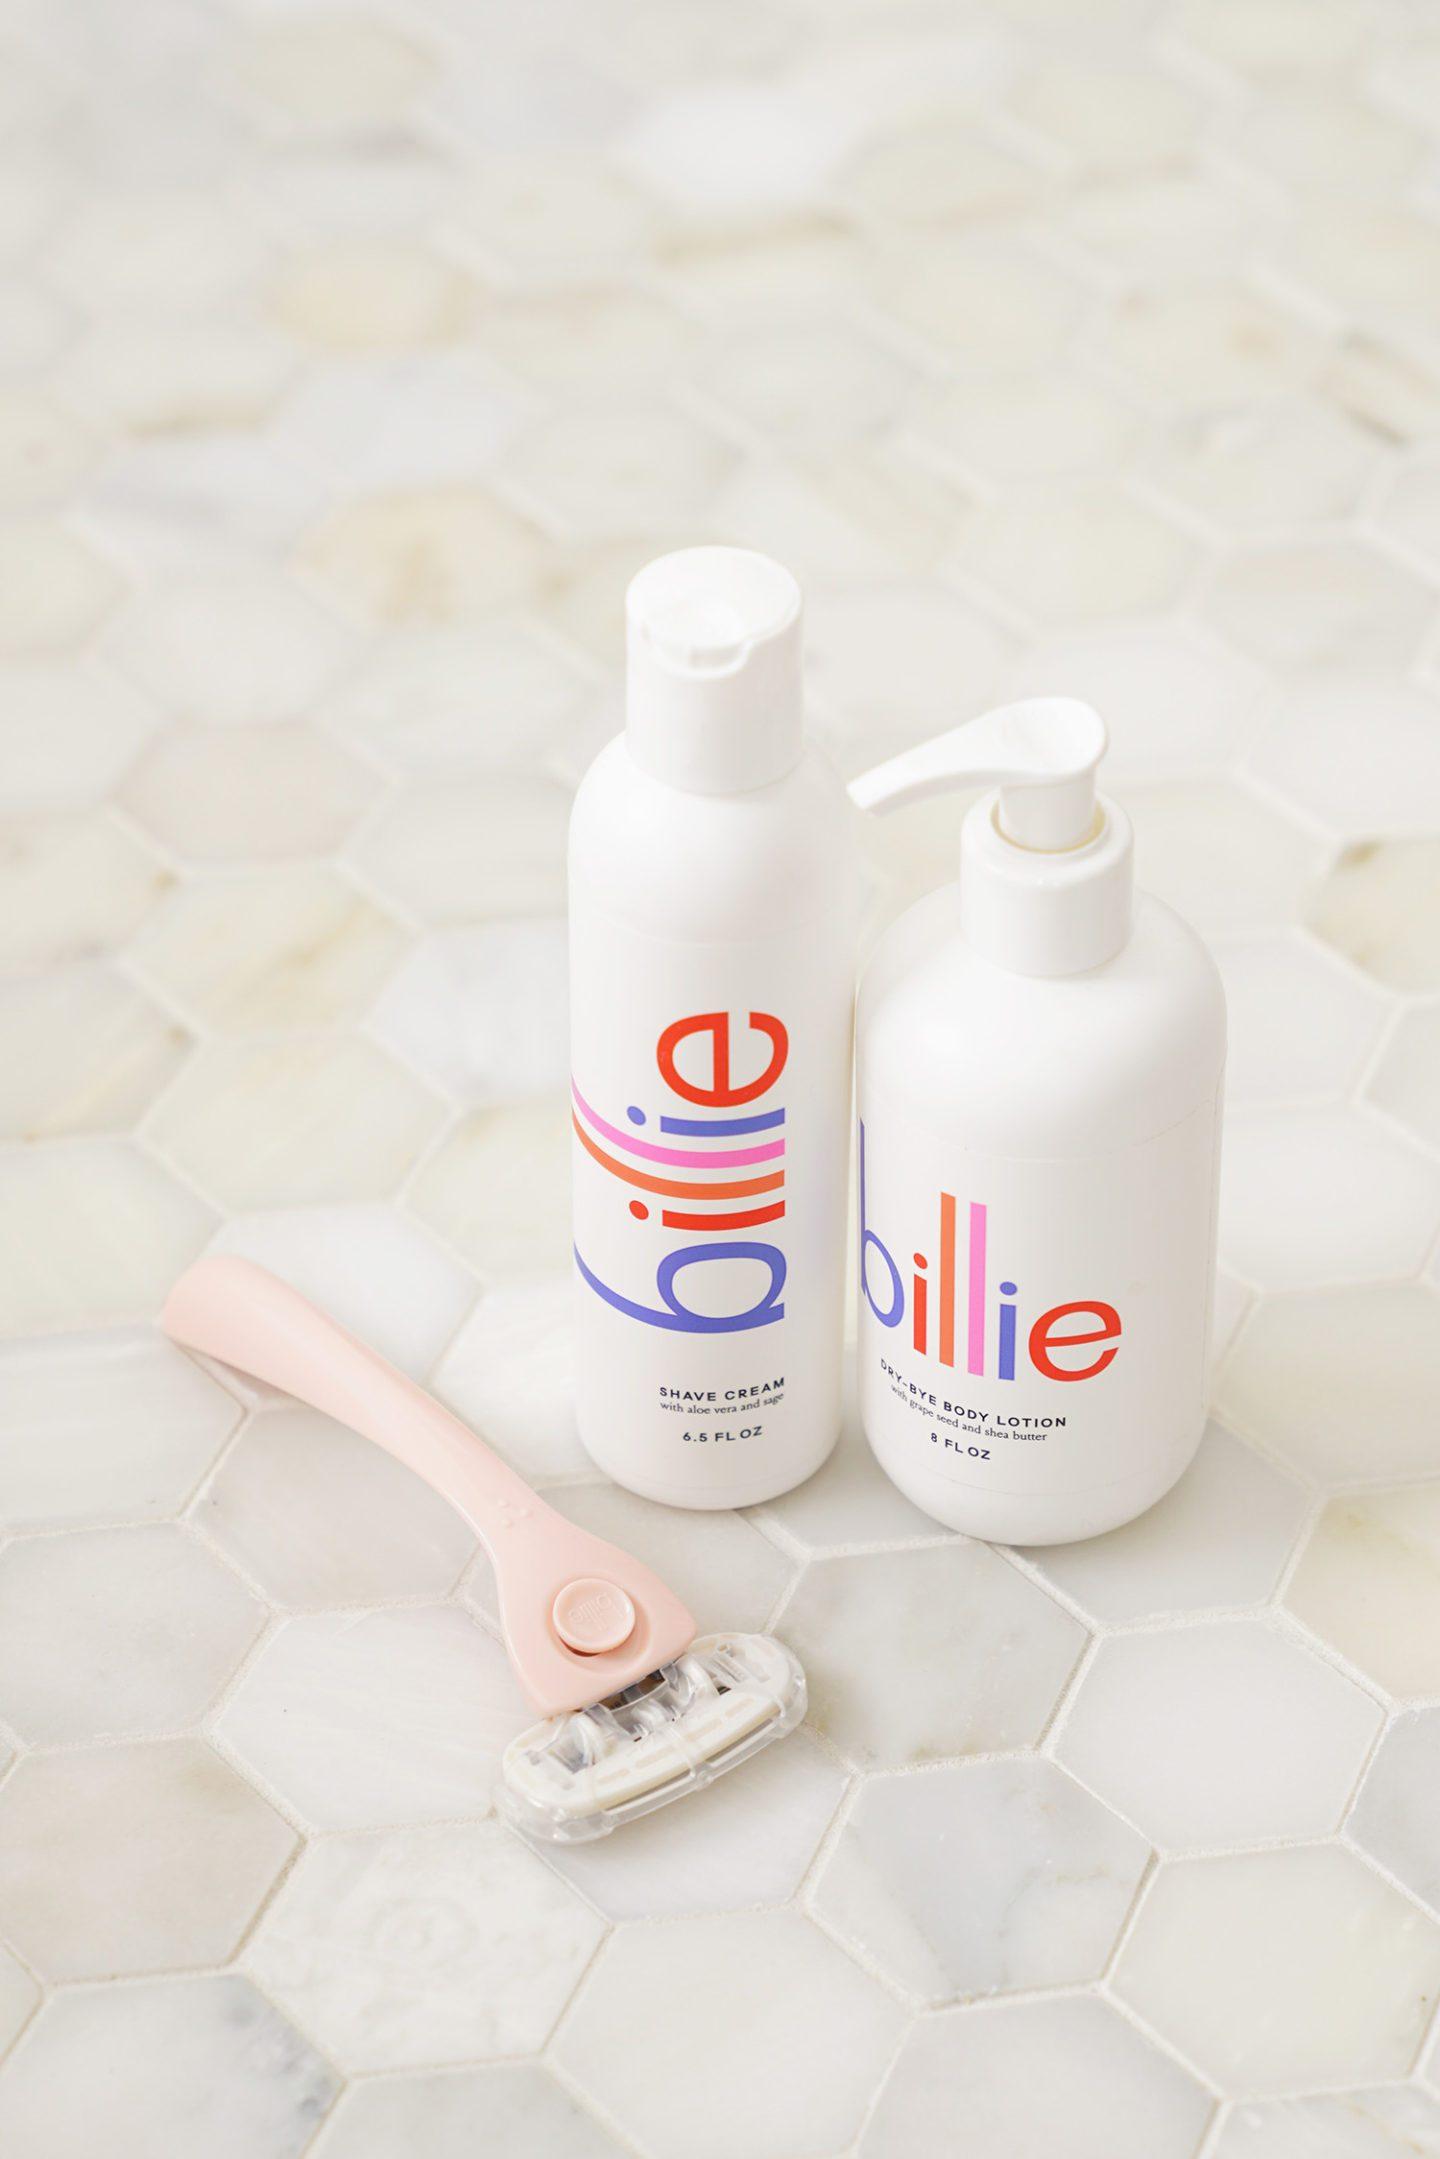 Billie Razor, Shave Cream and Dry-Bye Lotion Review via The Beauty look book